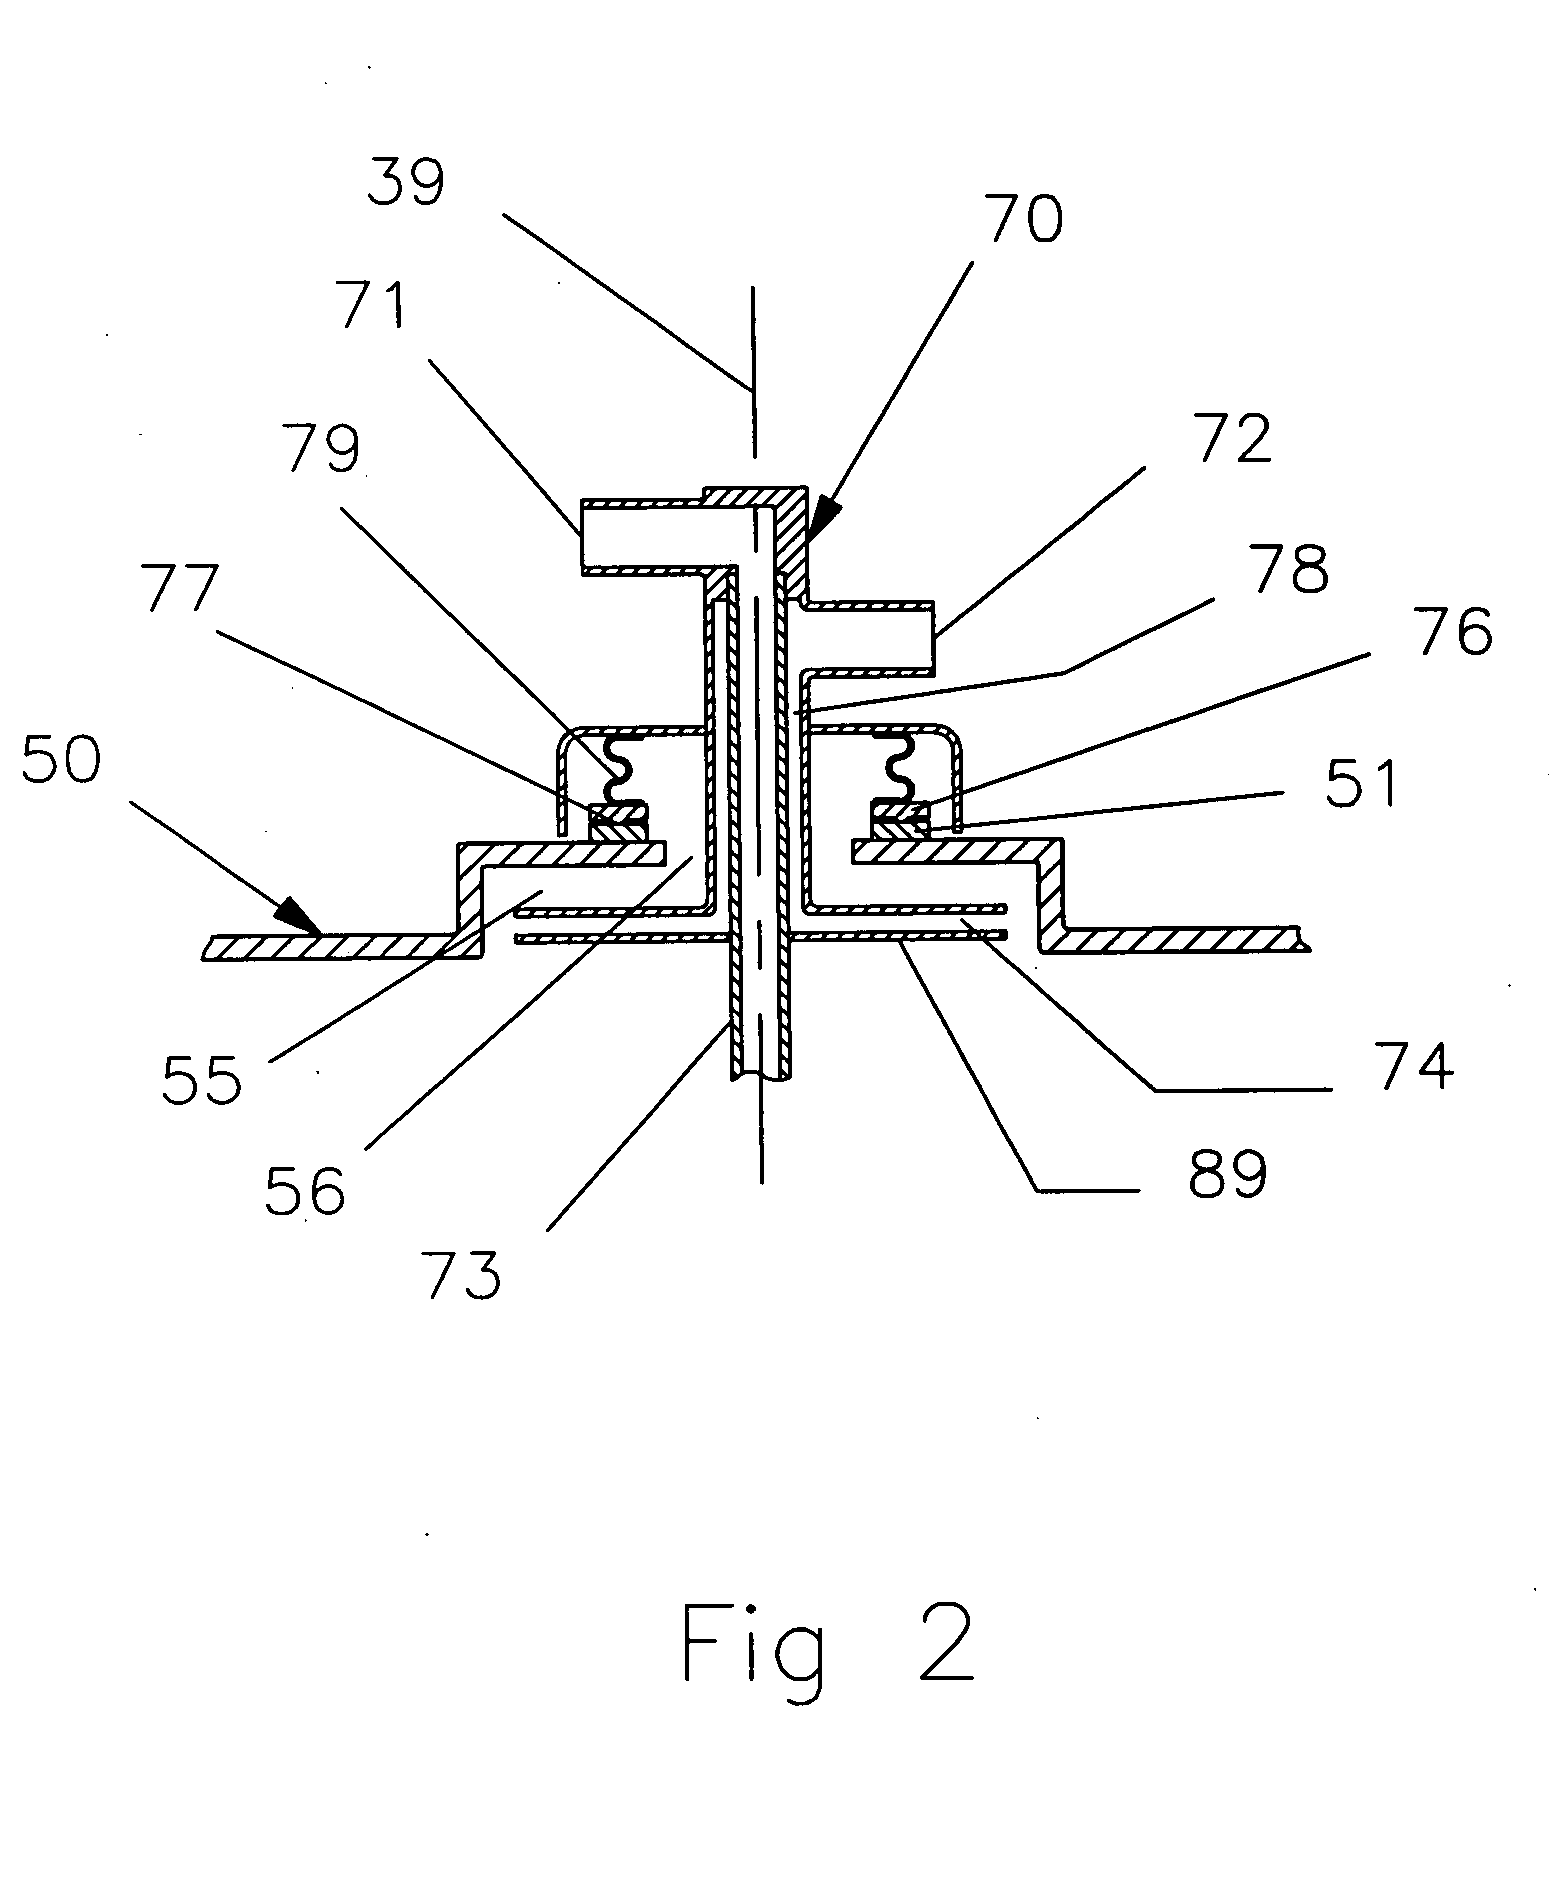 Rotor defining a fluid separation chamber of varying volume